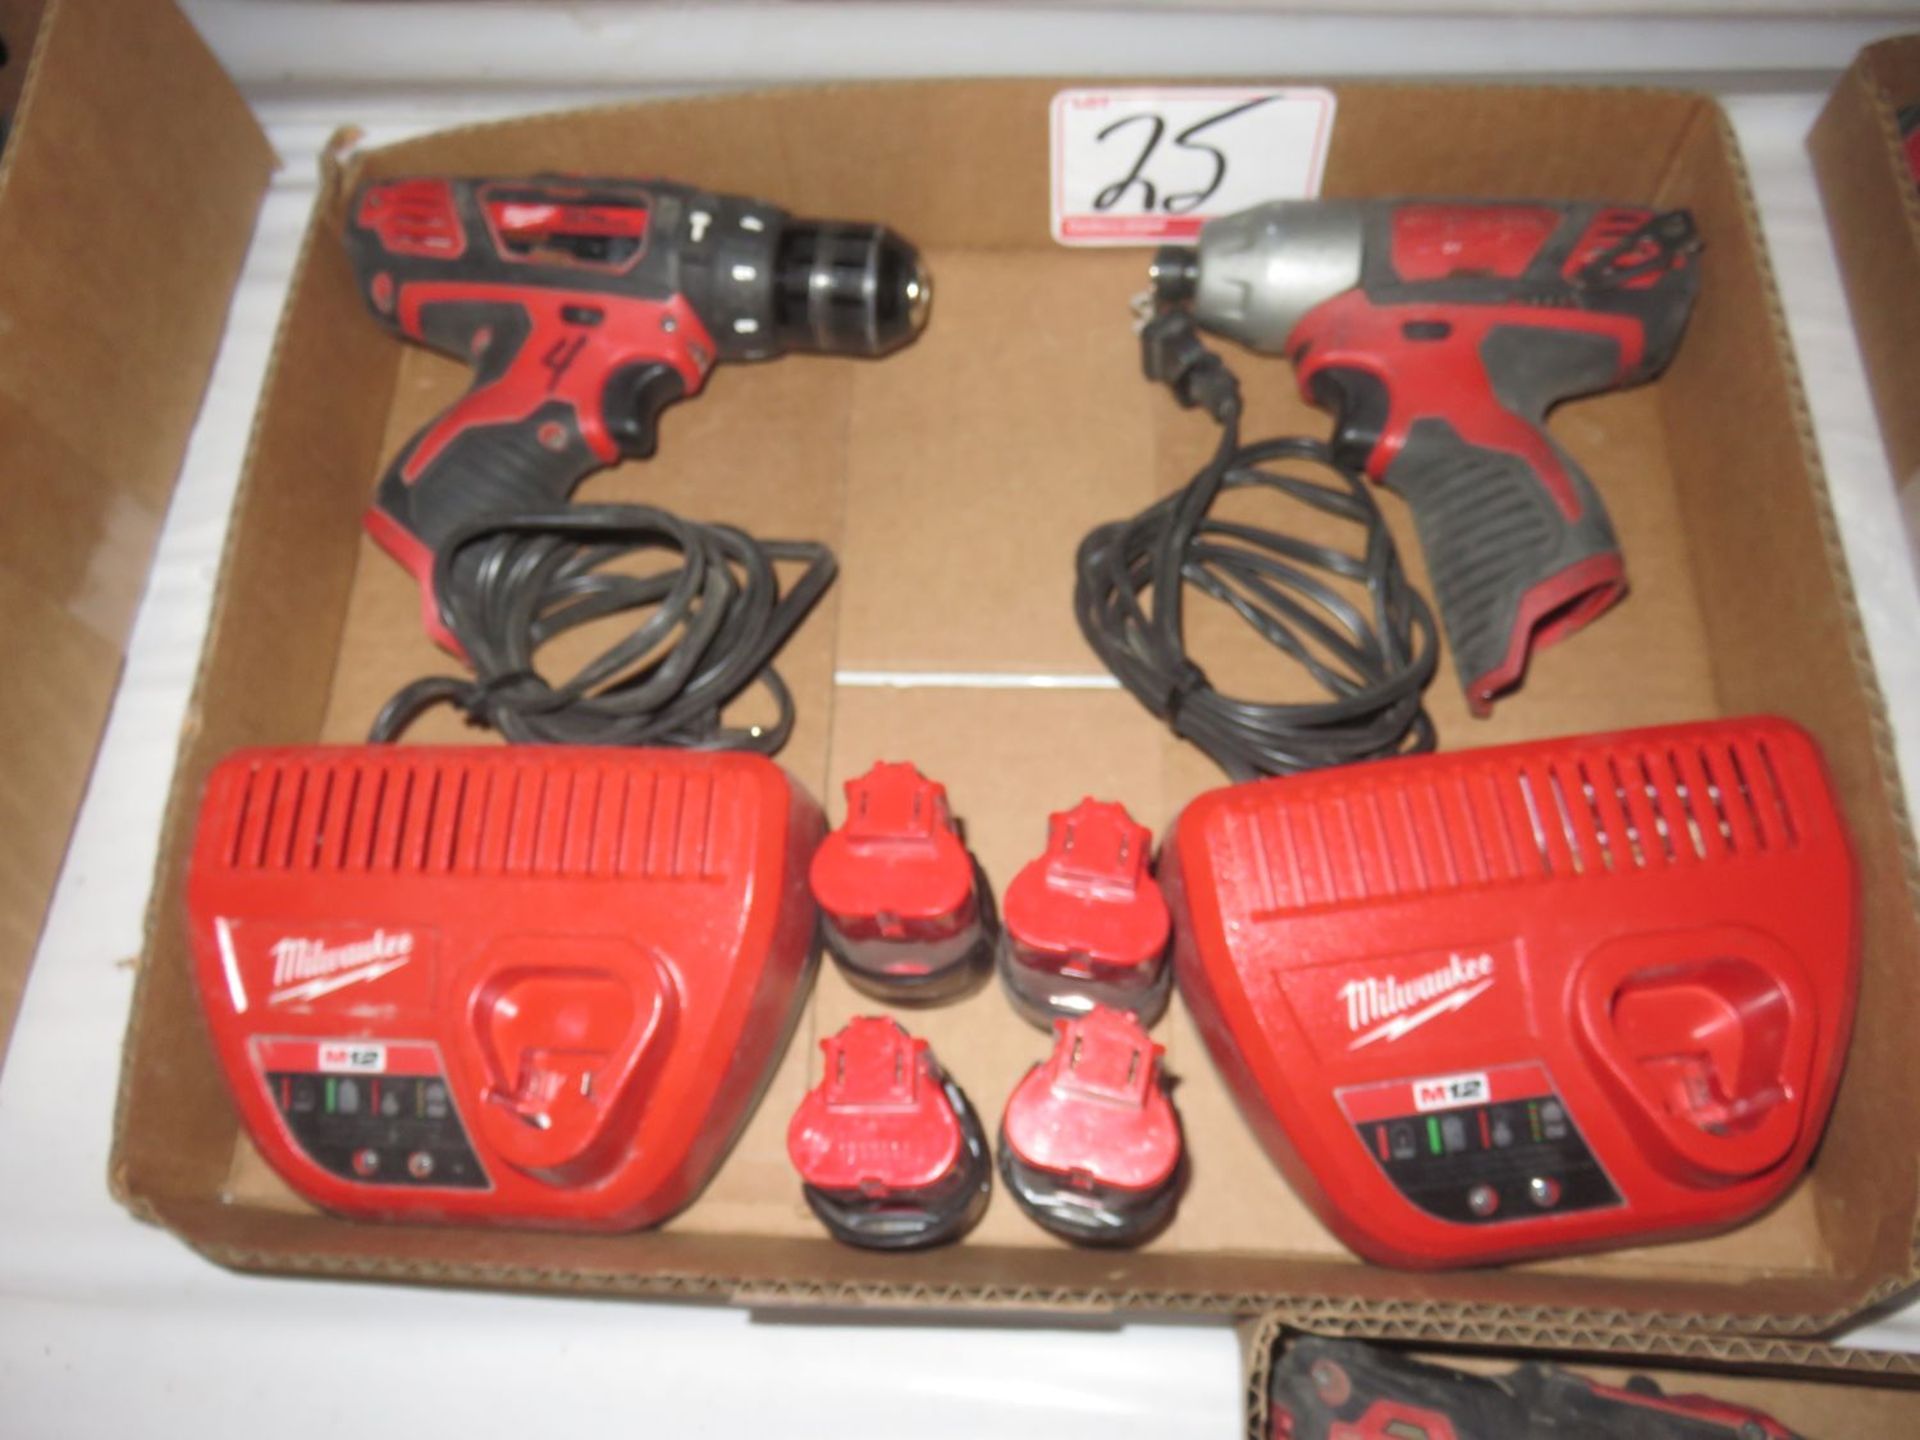 LOT - MILWAUKEE 2408-20 CORDLESS HAMMER DRILL / DRIVER & 2462-20 CORDLESS HEX IMPACT DRIVER C/W (